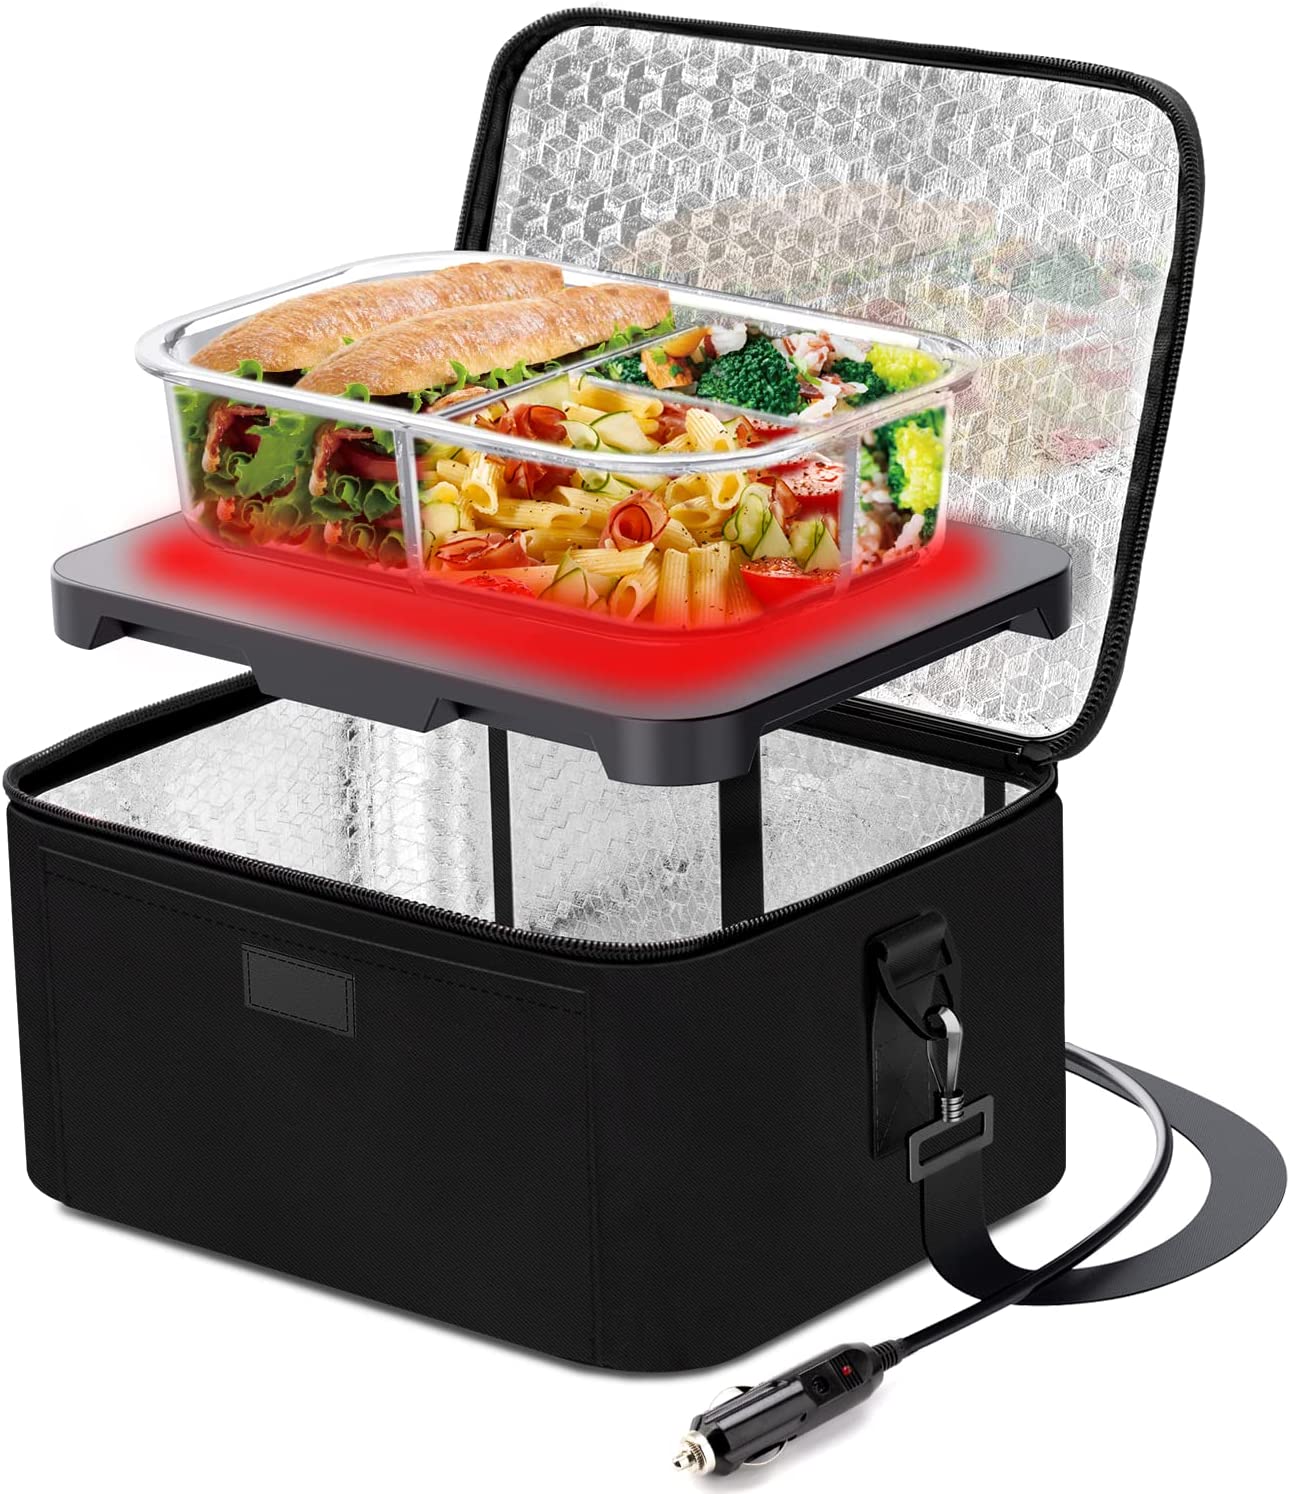 Portable Food Warmer and Heater for Car 12V 24V 2-in-1 $21.43